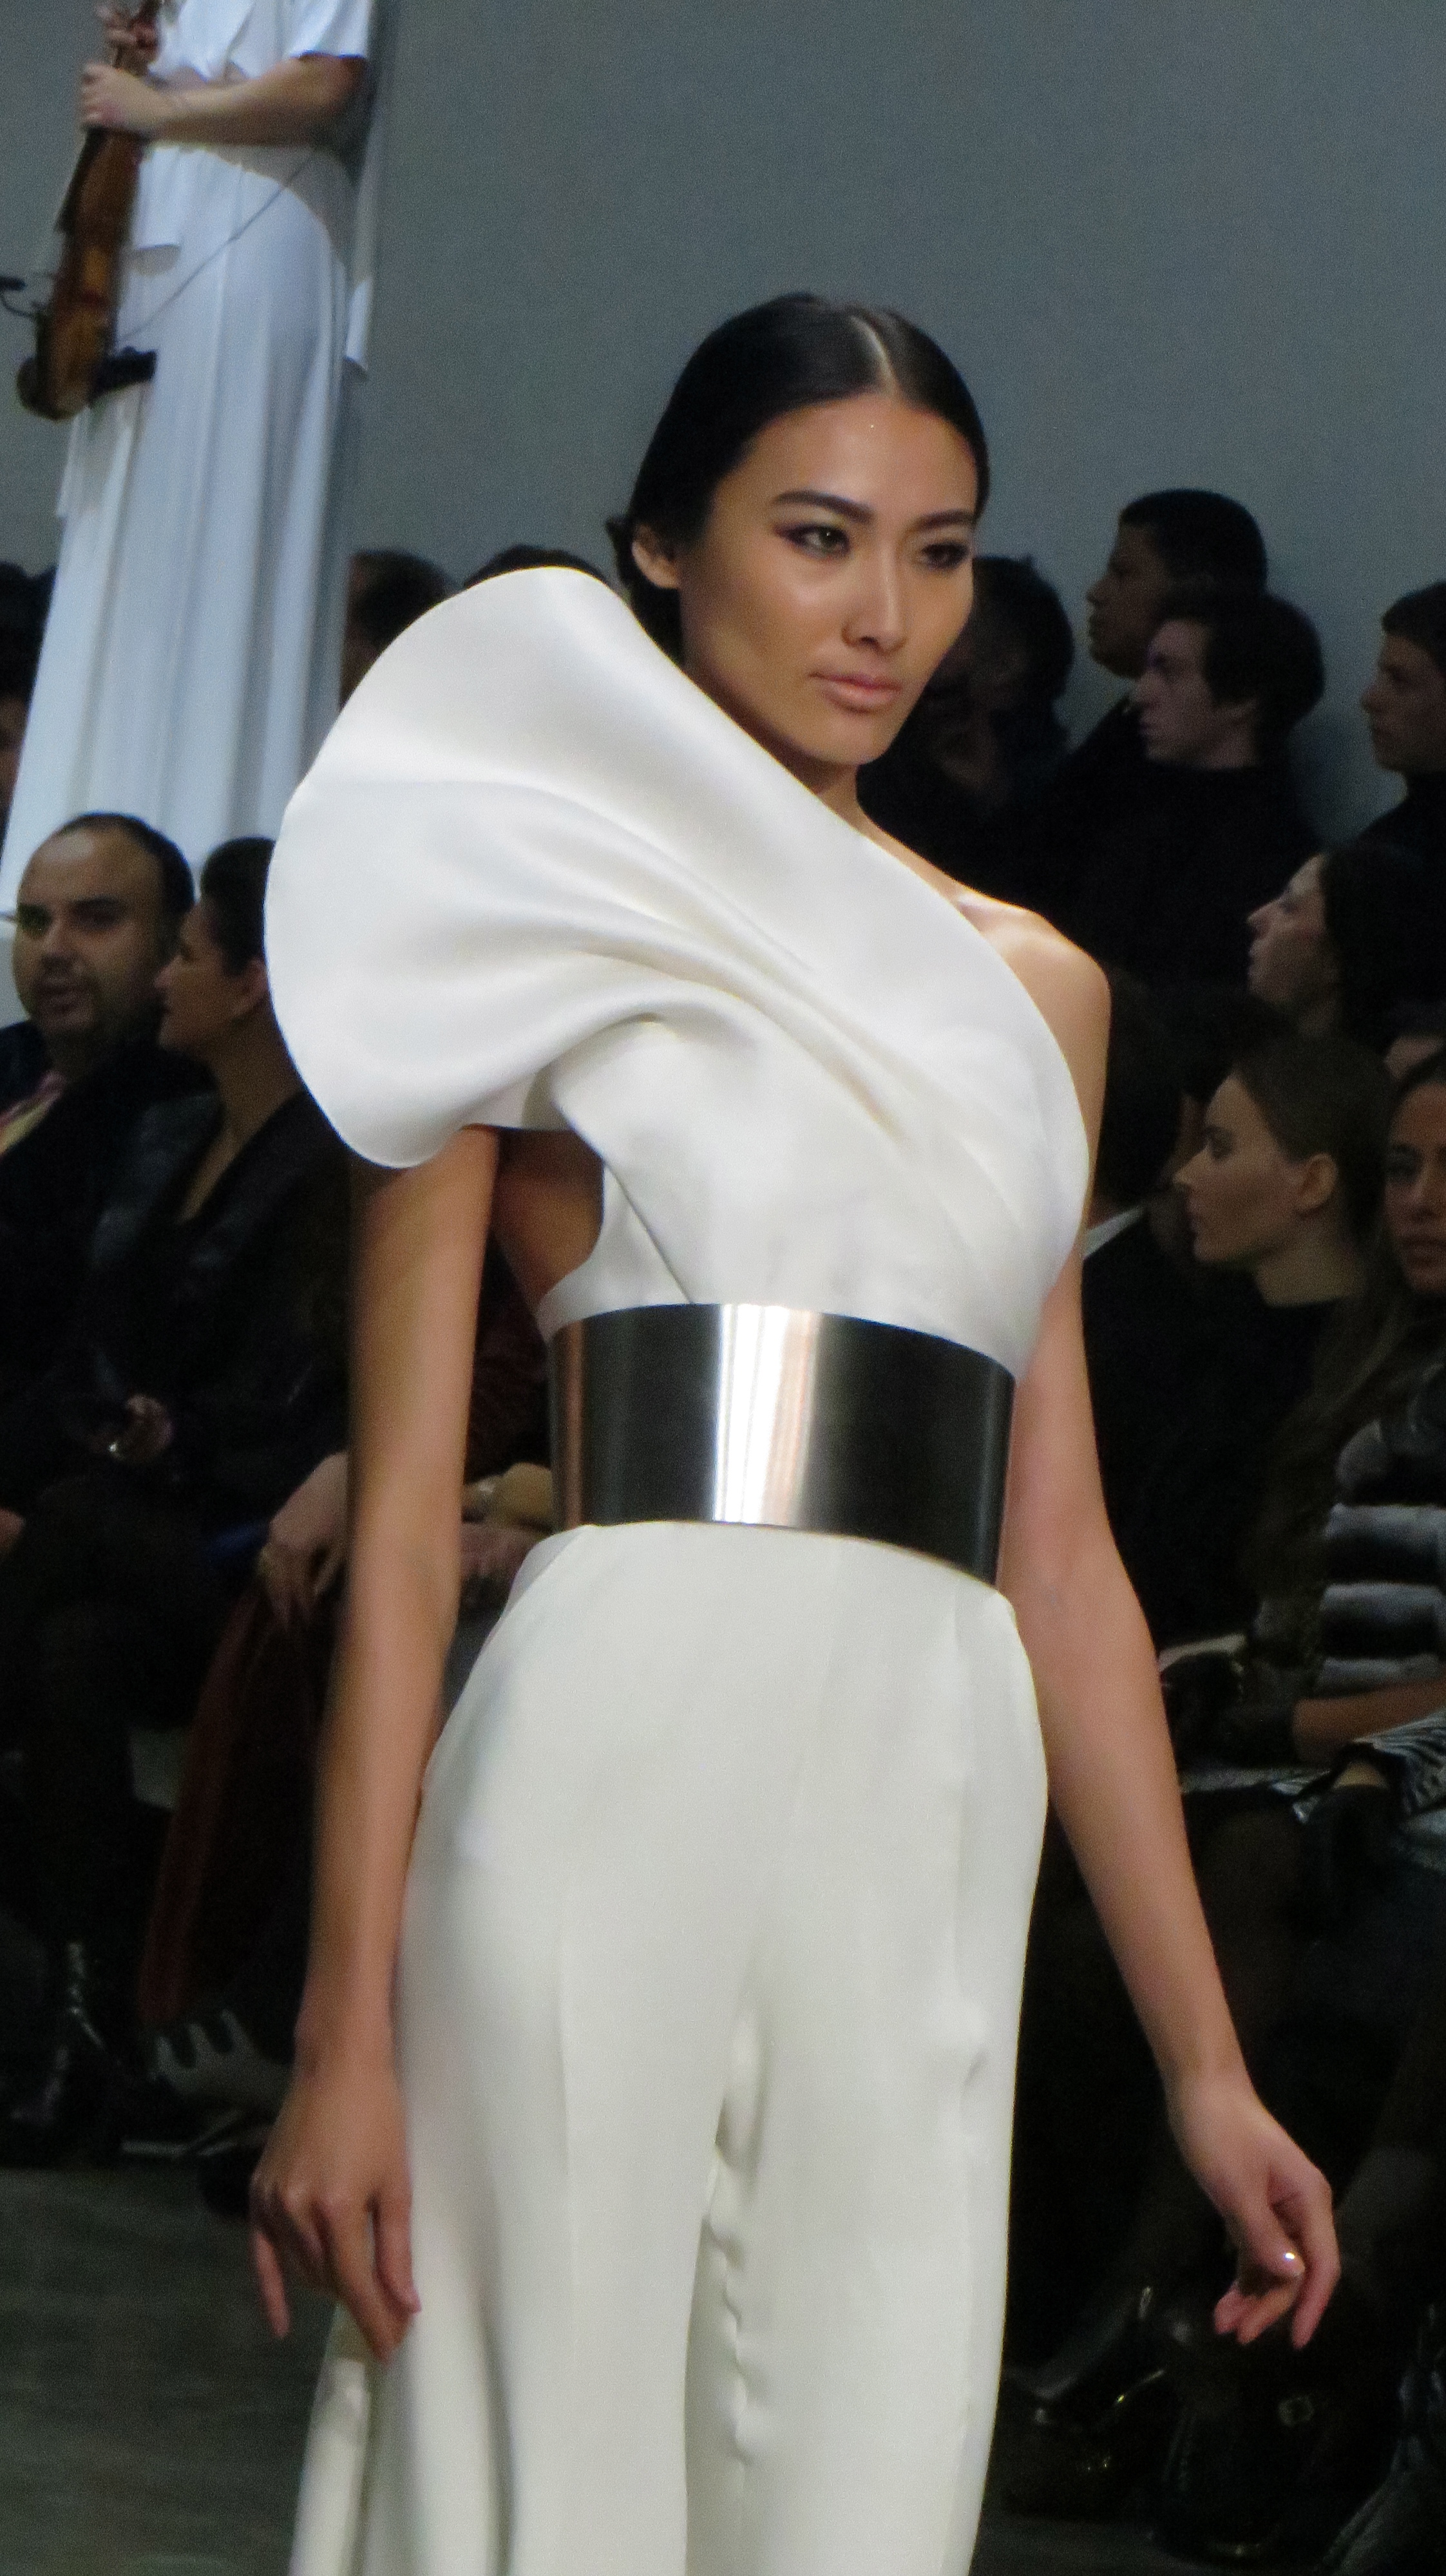 Stephane Rolland, Haute Couture show 2013 | Agent luxe blog